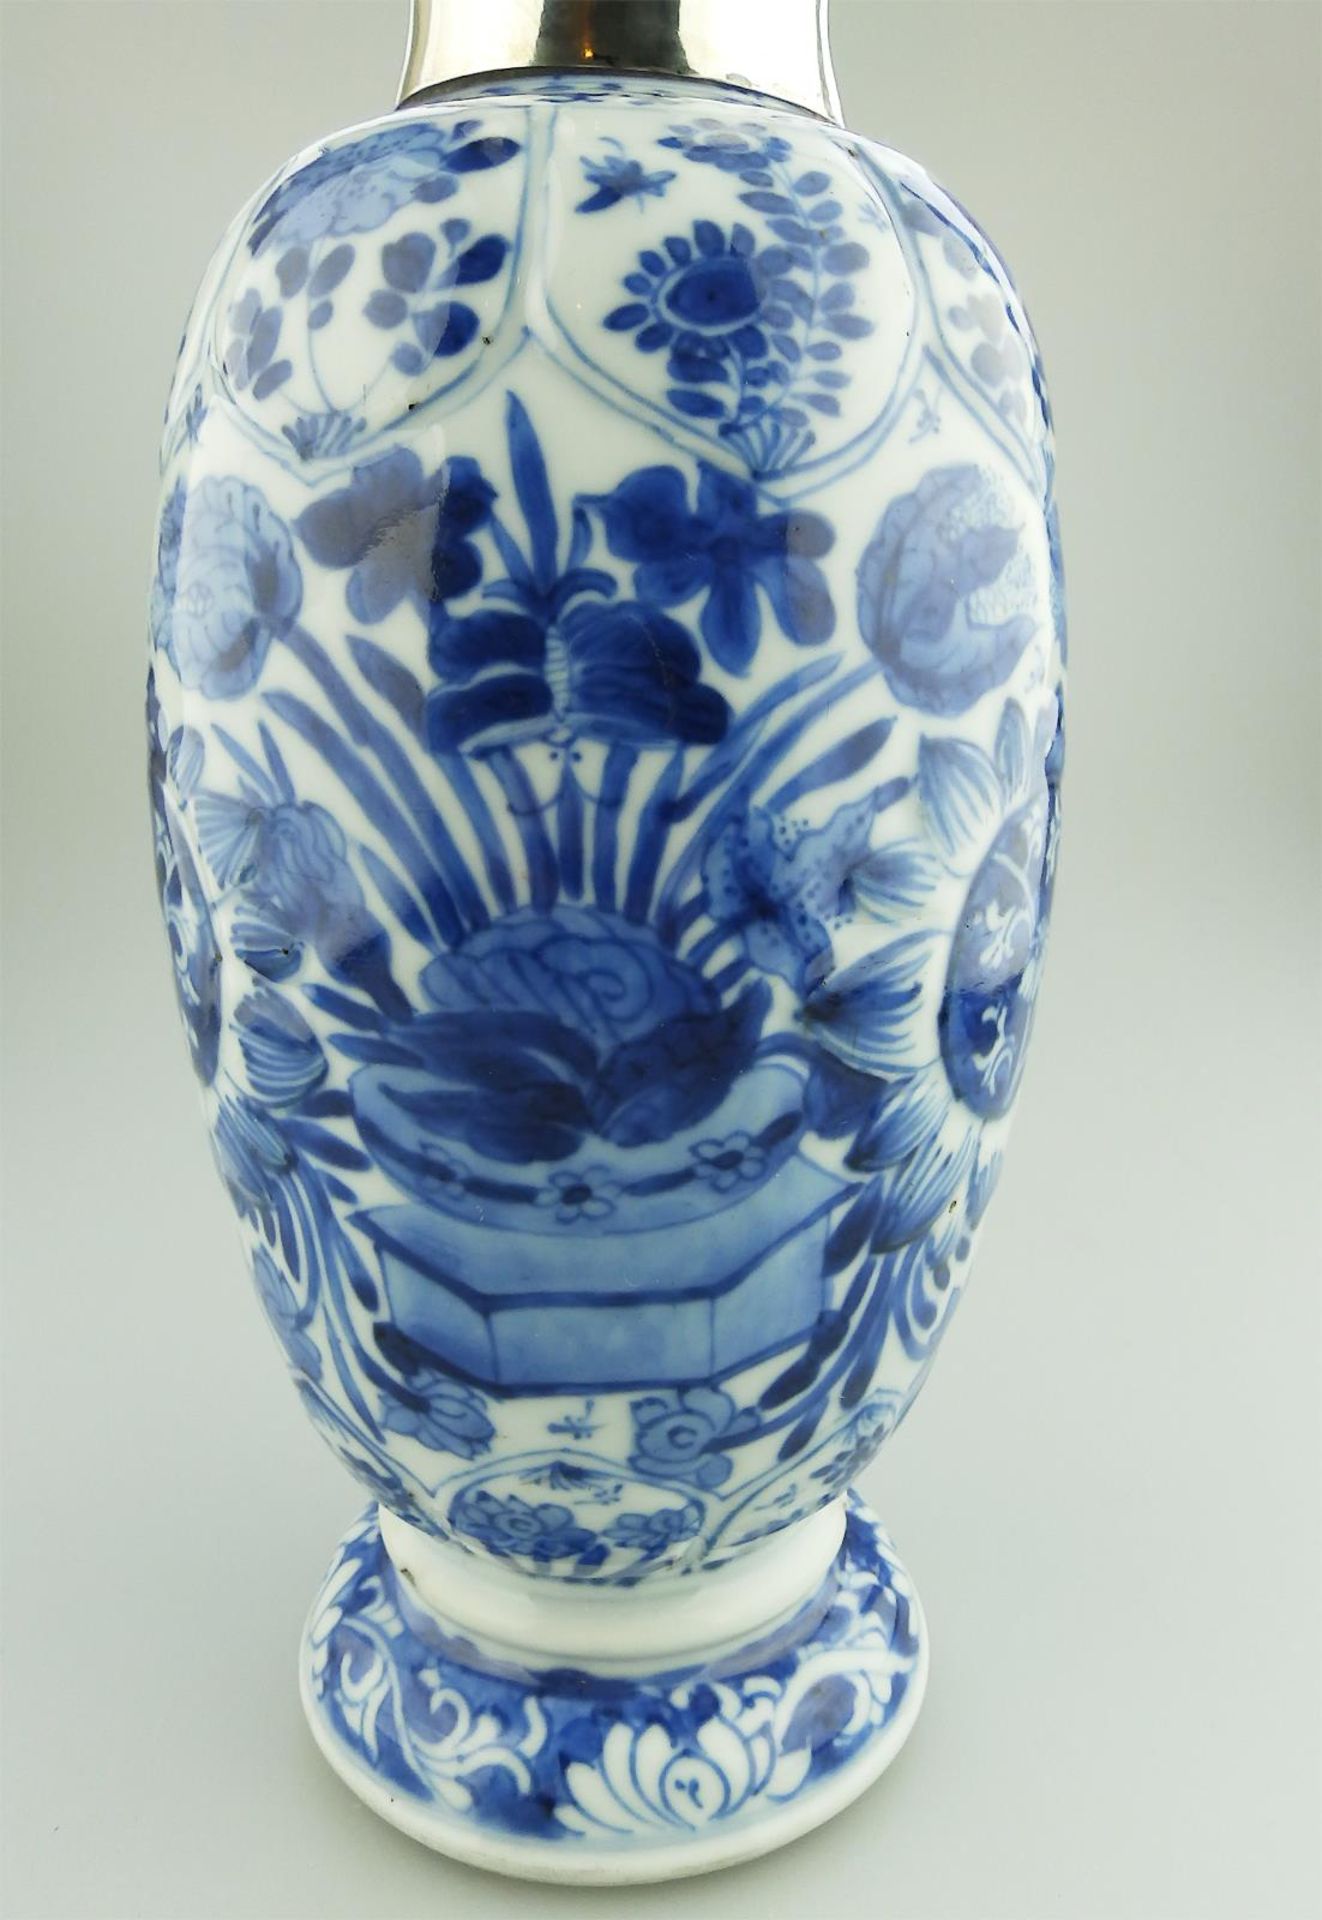 A very fine Chinese porcelain hand painted Vase C.17thC - Image 4 of 10